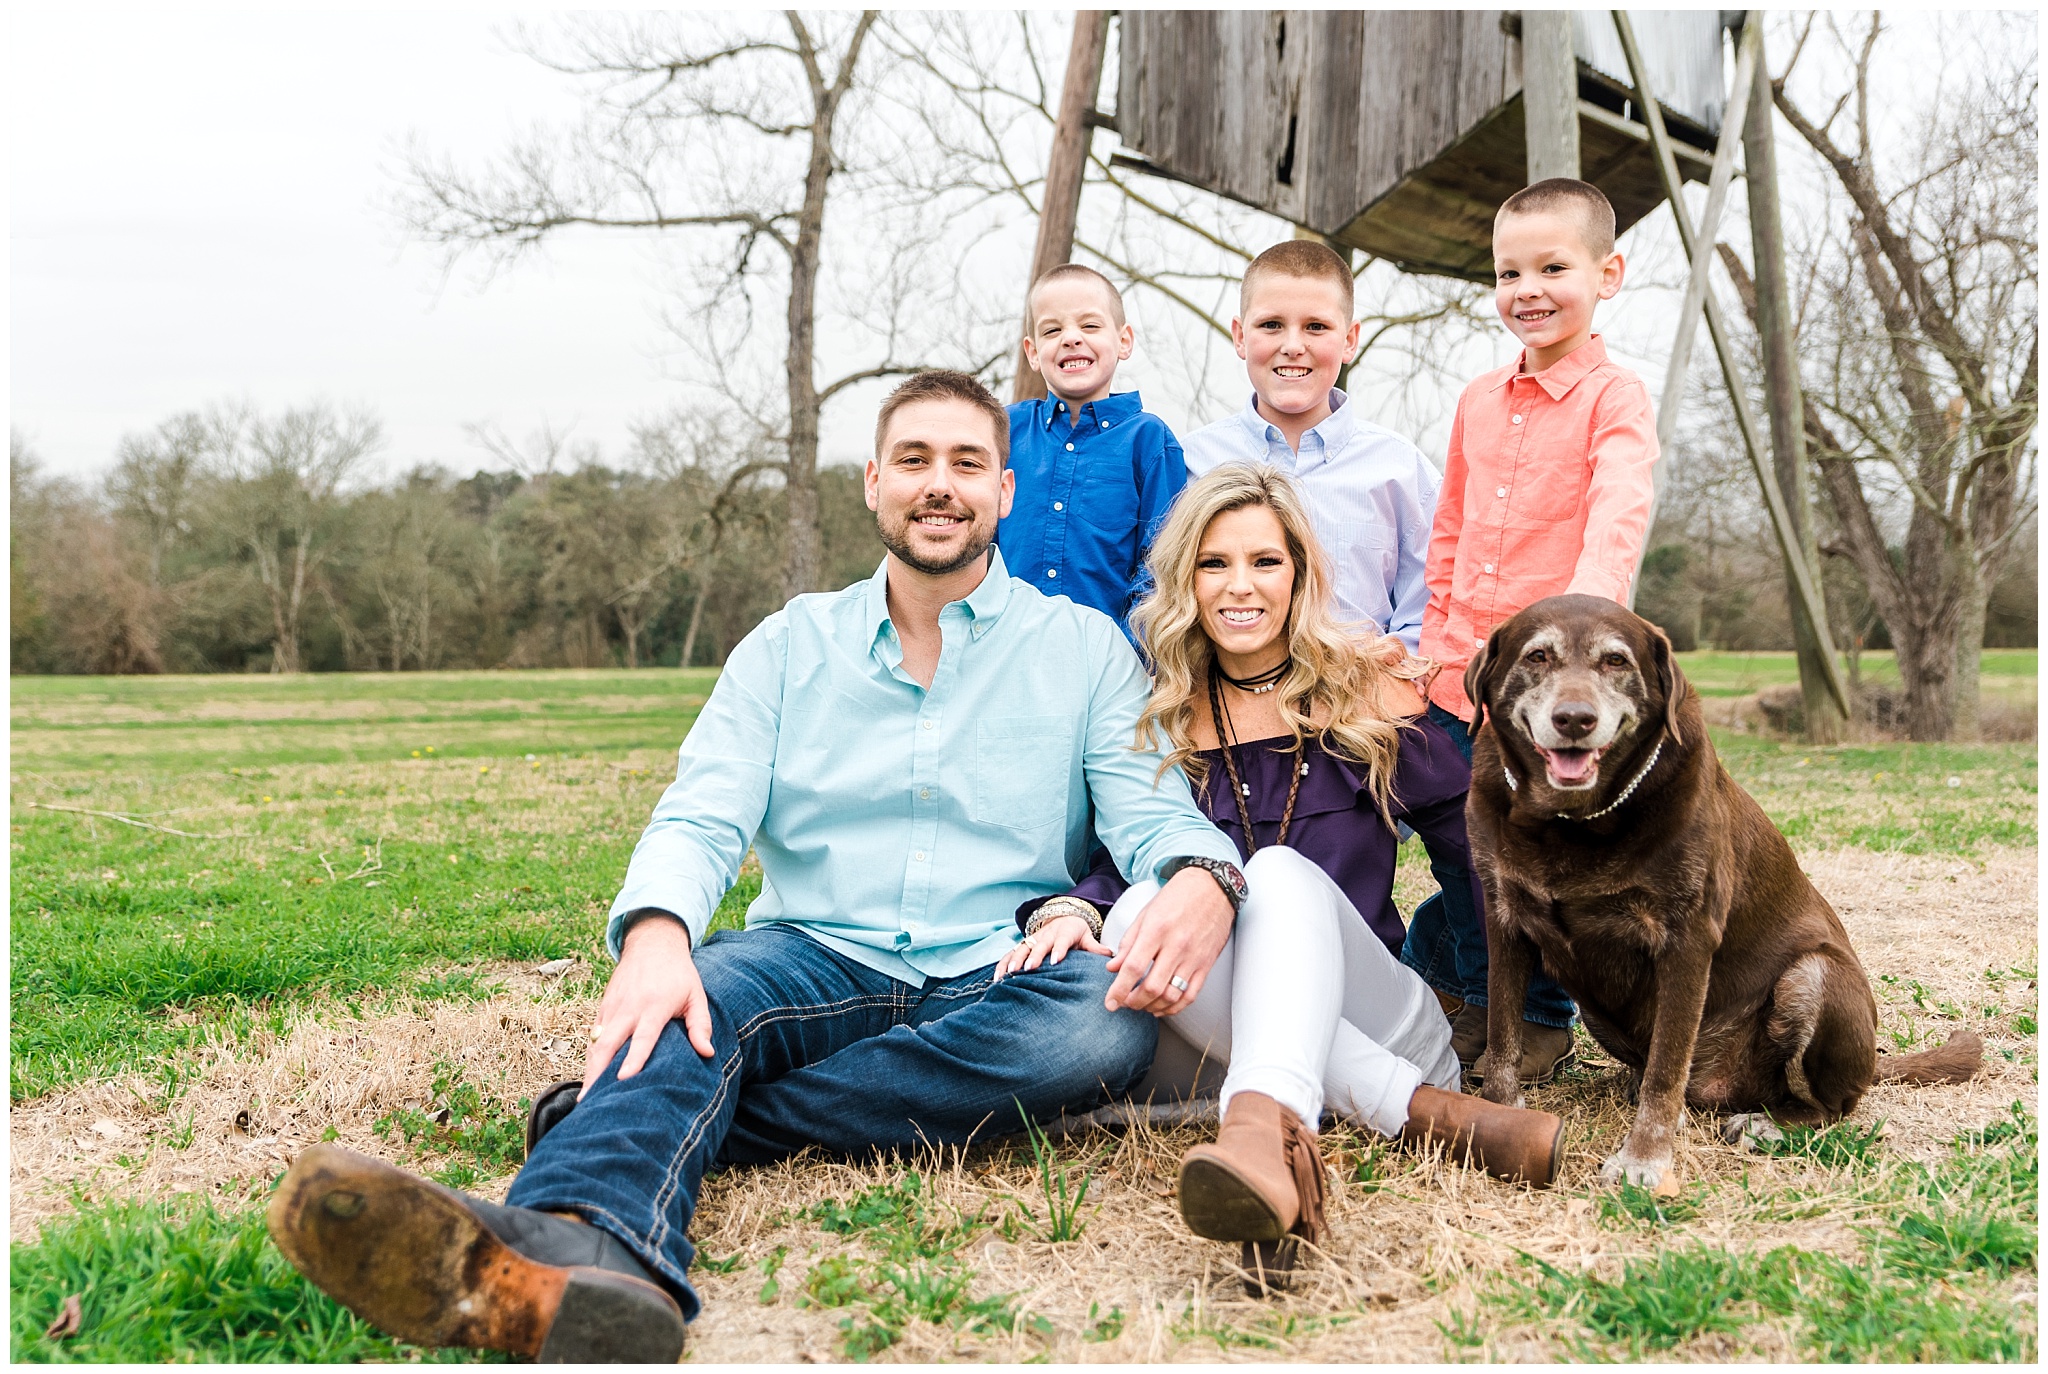 Small Town Texas Family Photography Session_2017-02-12_0006